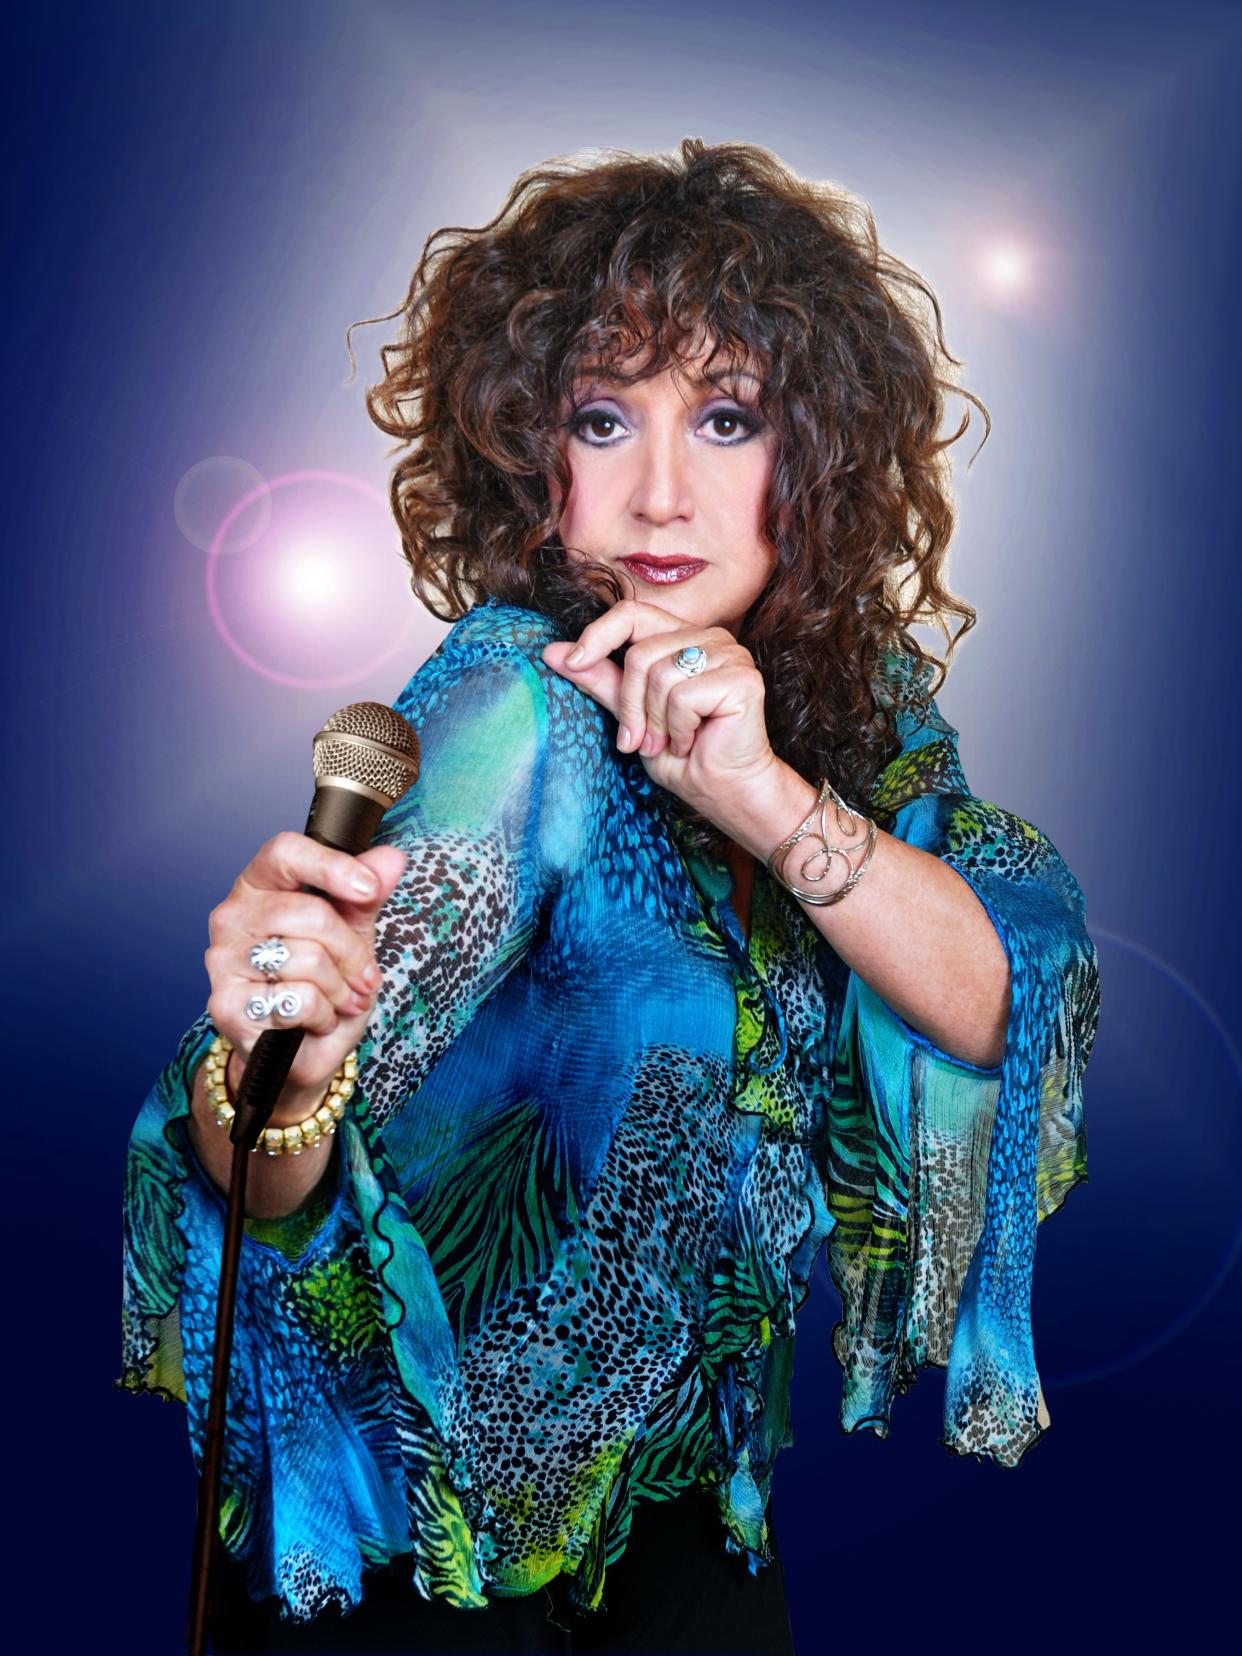 Singer Maria Muldaur will perform in West Yarmouth as part of an East Coast tour.